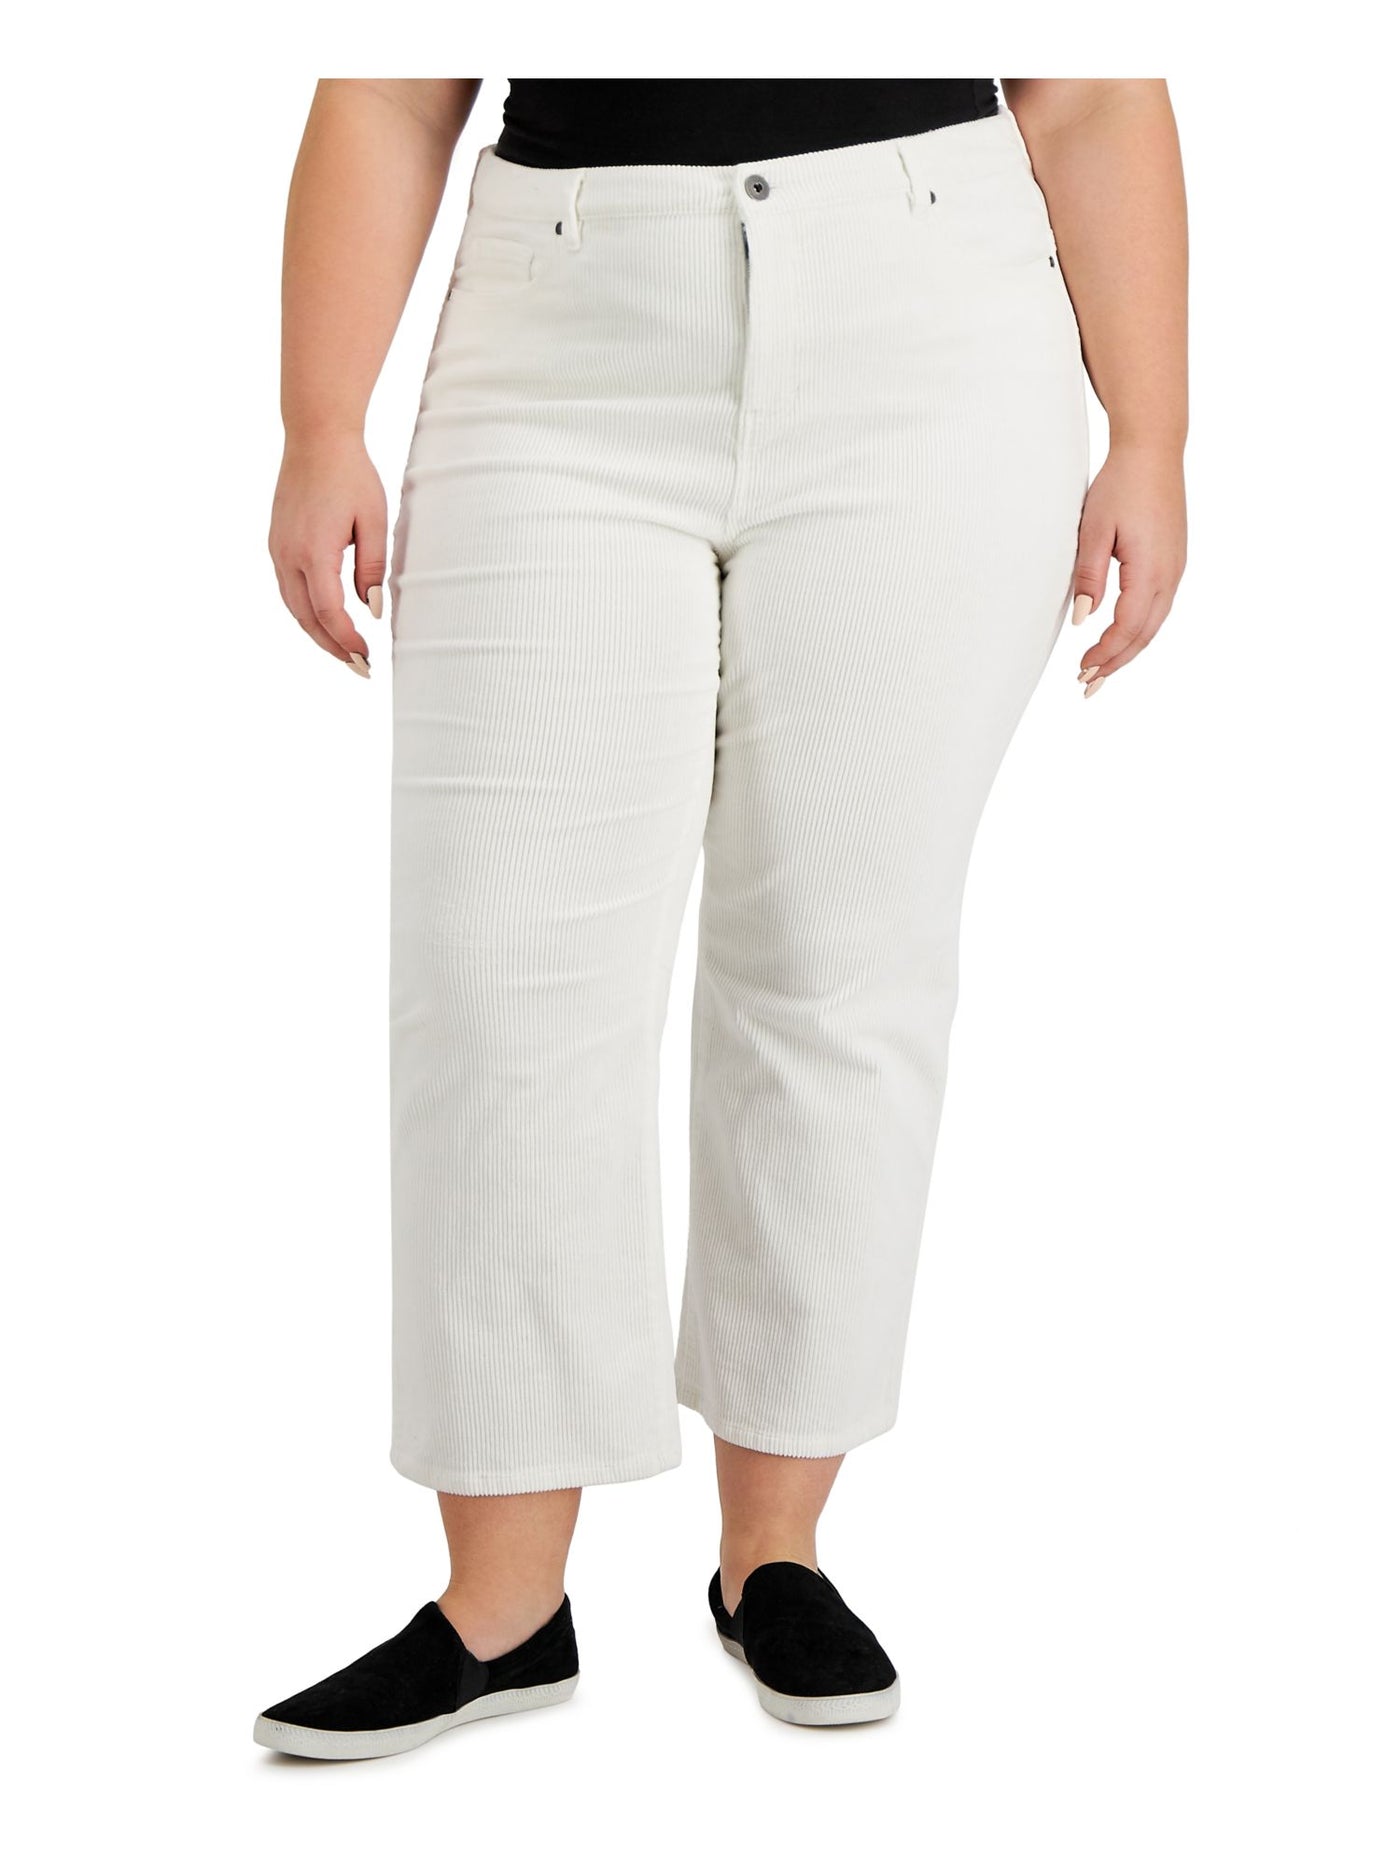 STYLE & COMPANY Womens Ivory Zippered Pocketed Button Closure High Waist Pants 14